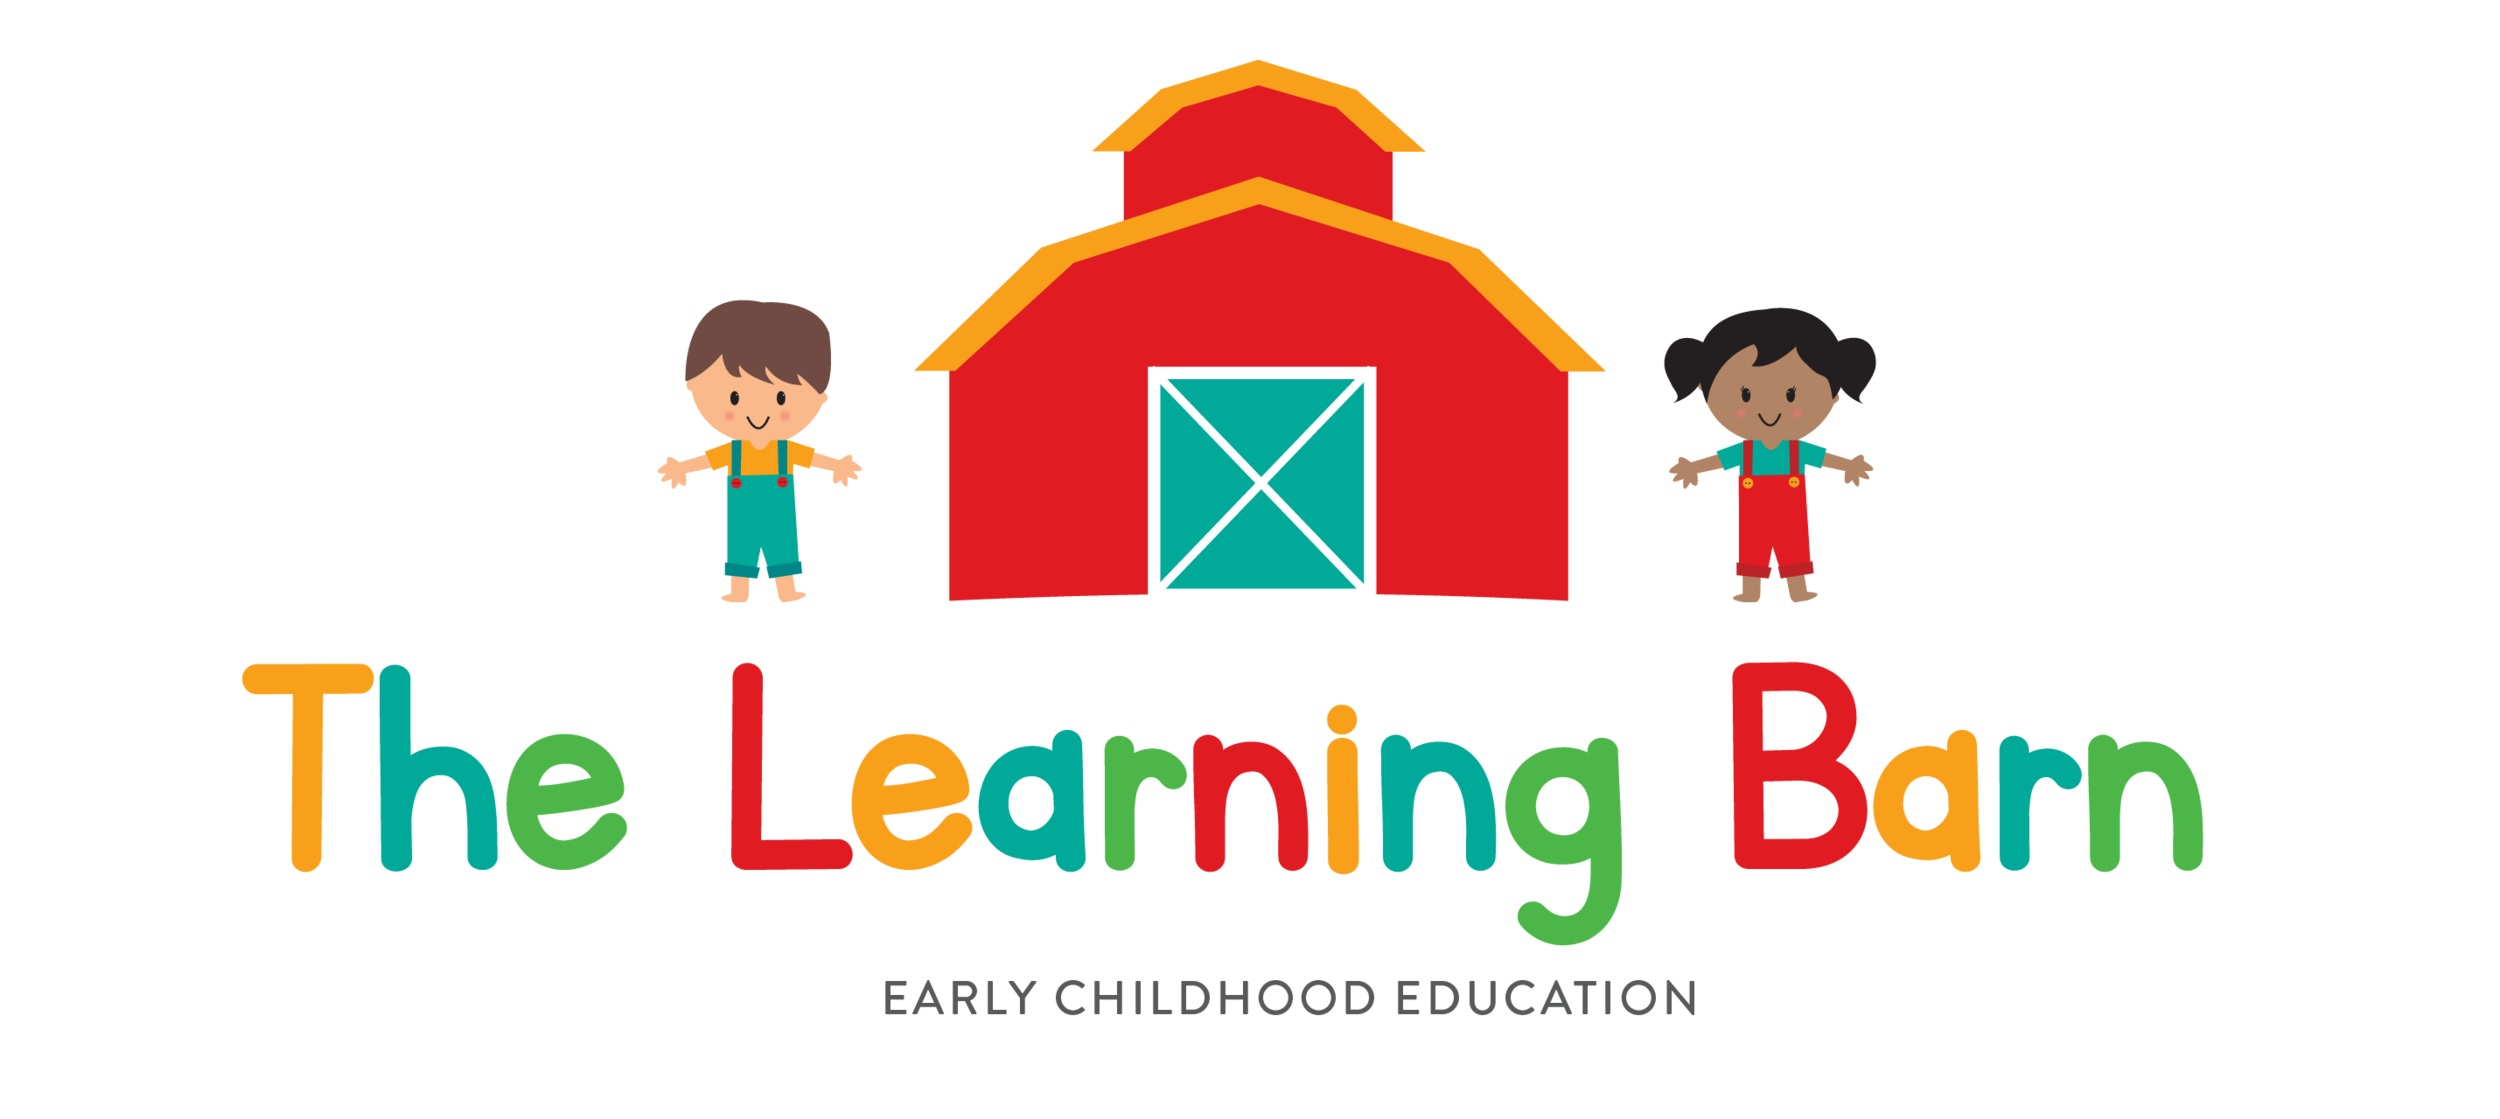 The Learning Barn